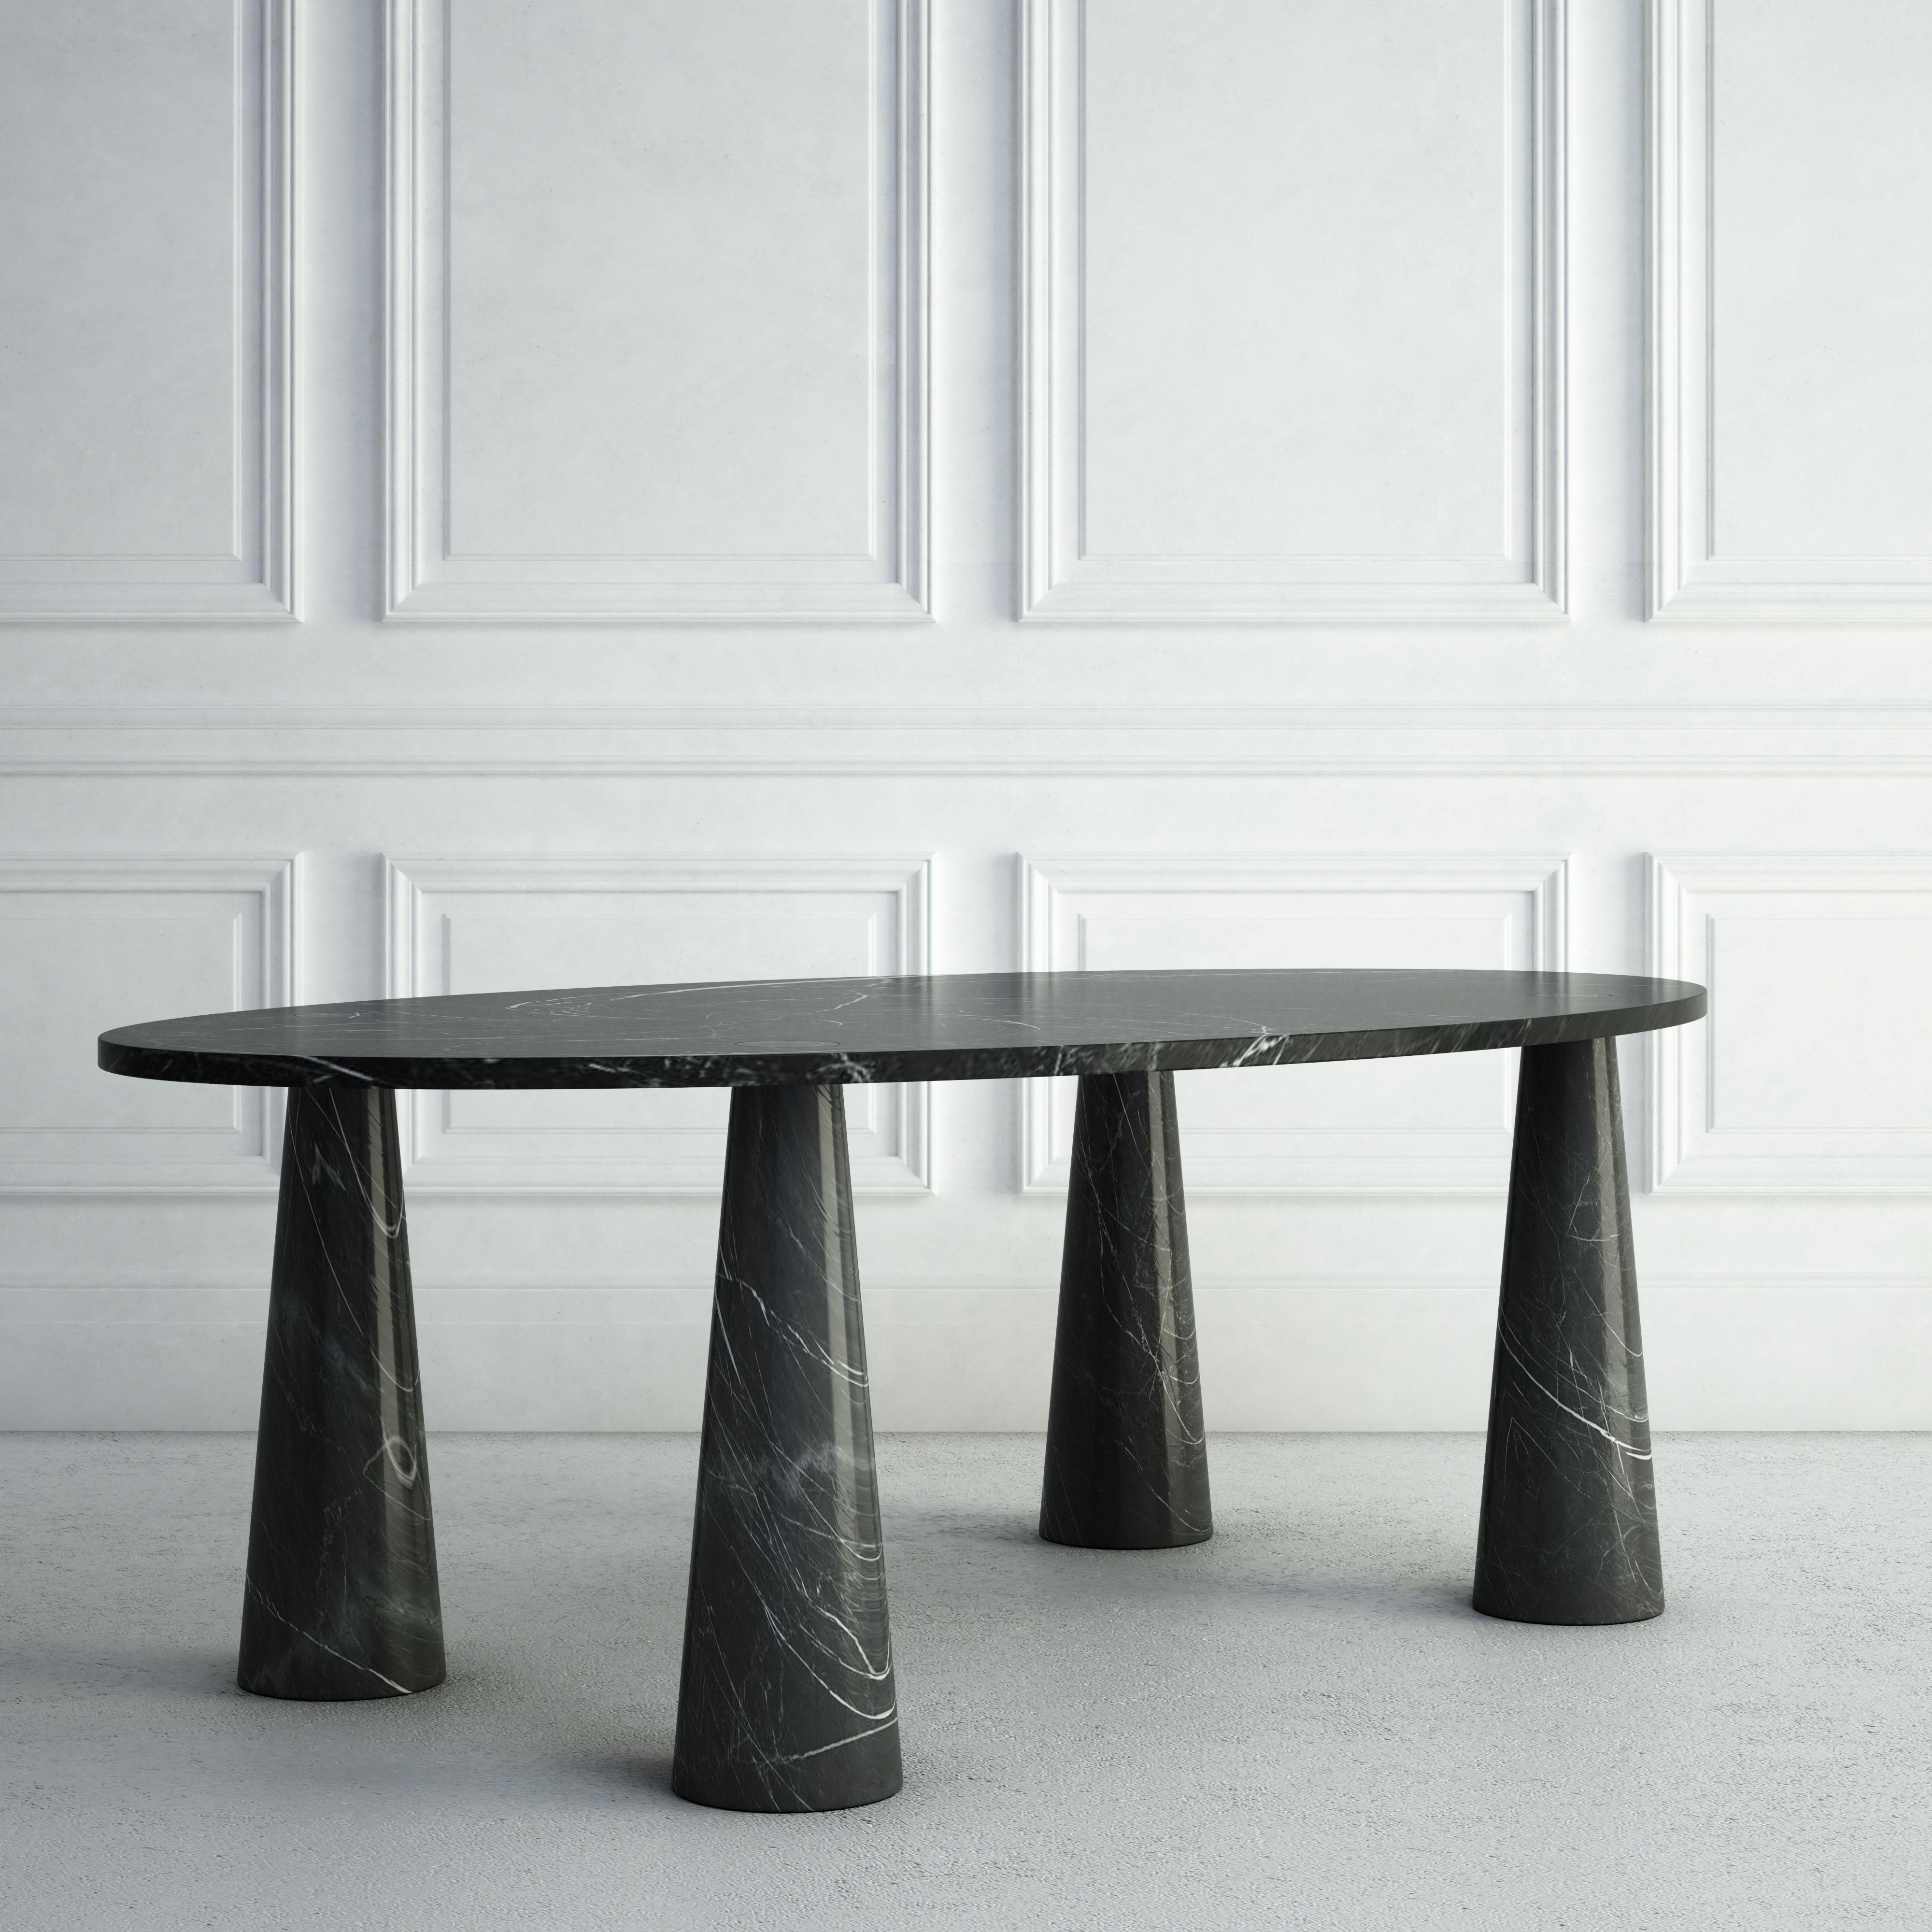 The Marianne is a whimsical modern dining table, and a variation of our Simone Table.  The top is made from an elegant thin oval stone slab.  The legs are rounded, but taper in as they reach the top, giving them a conical shape.  The